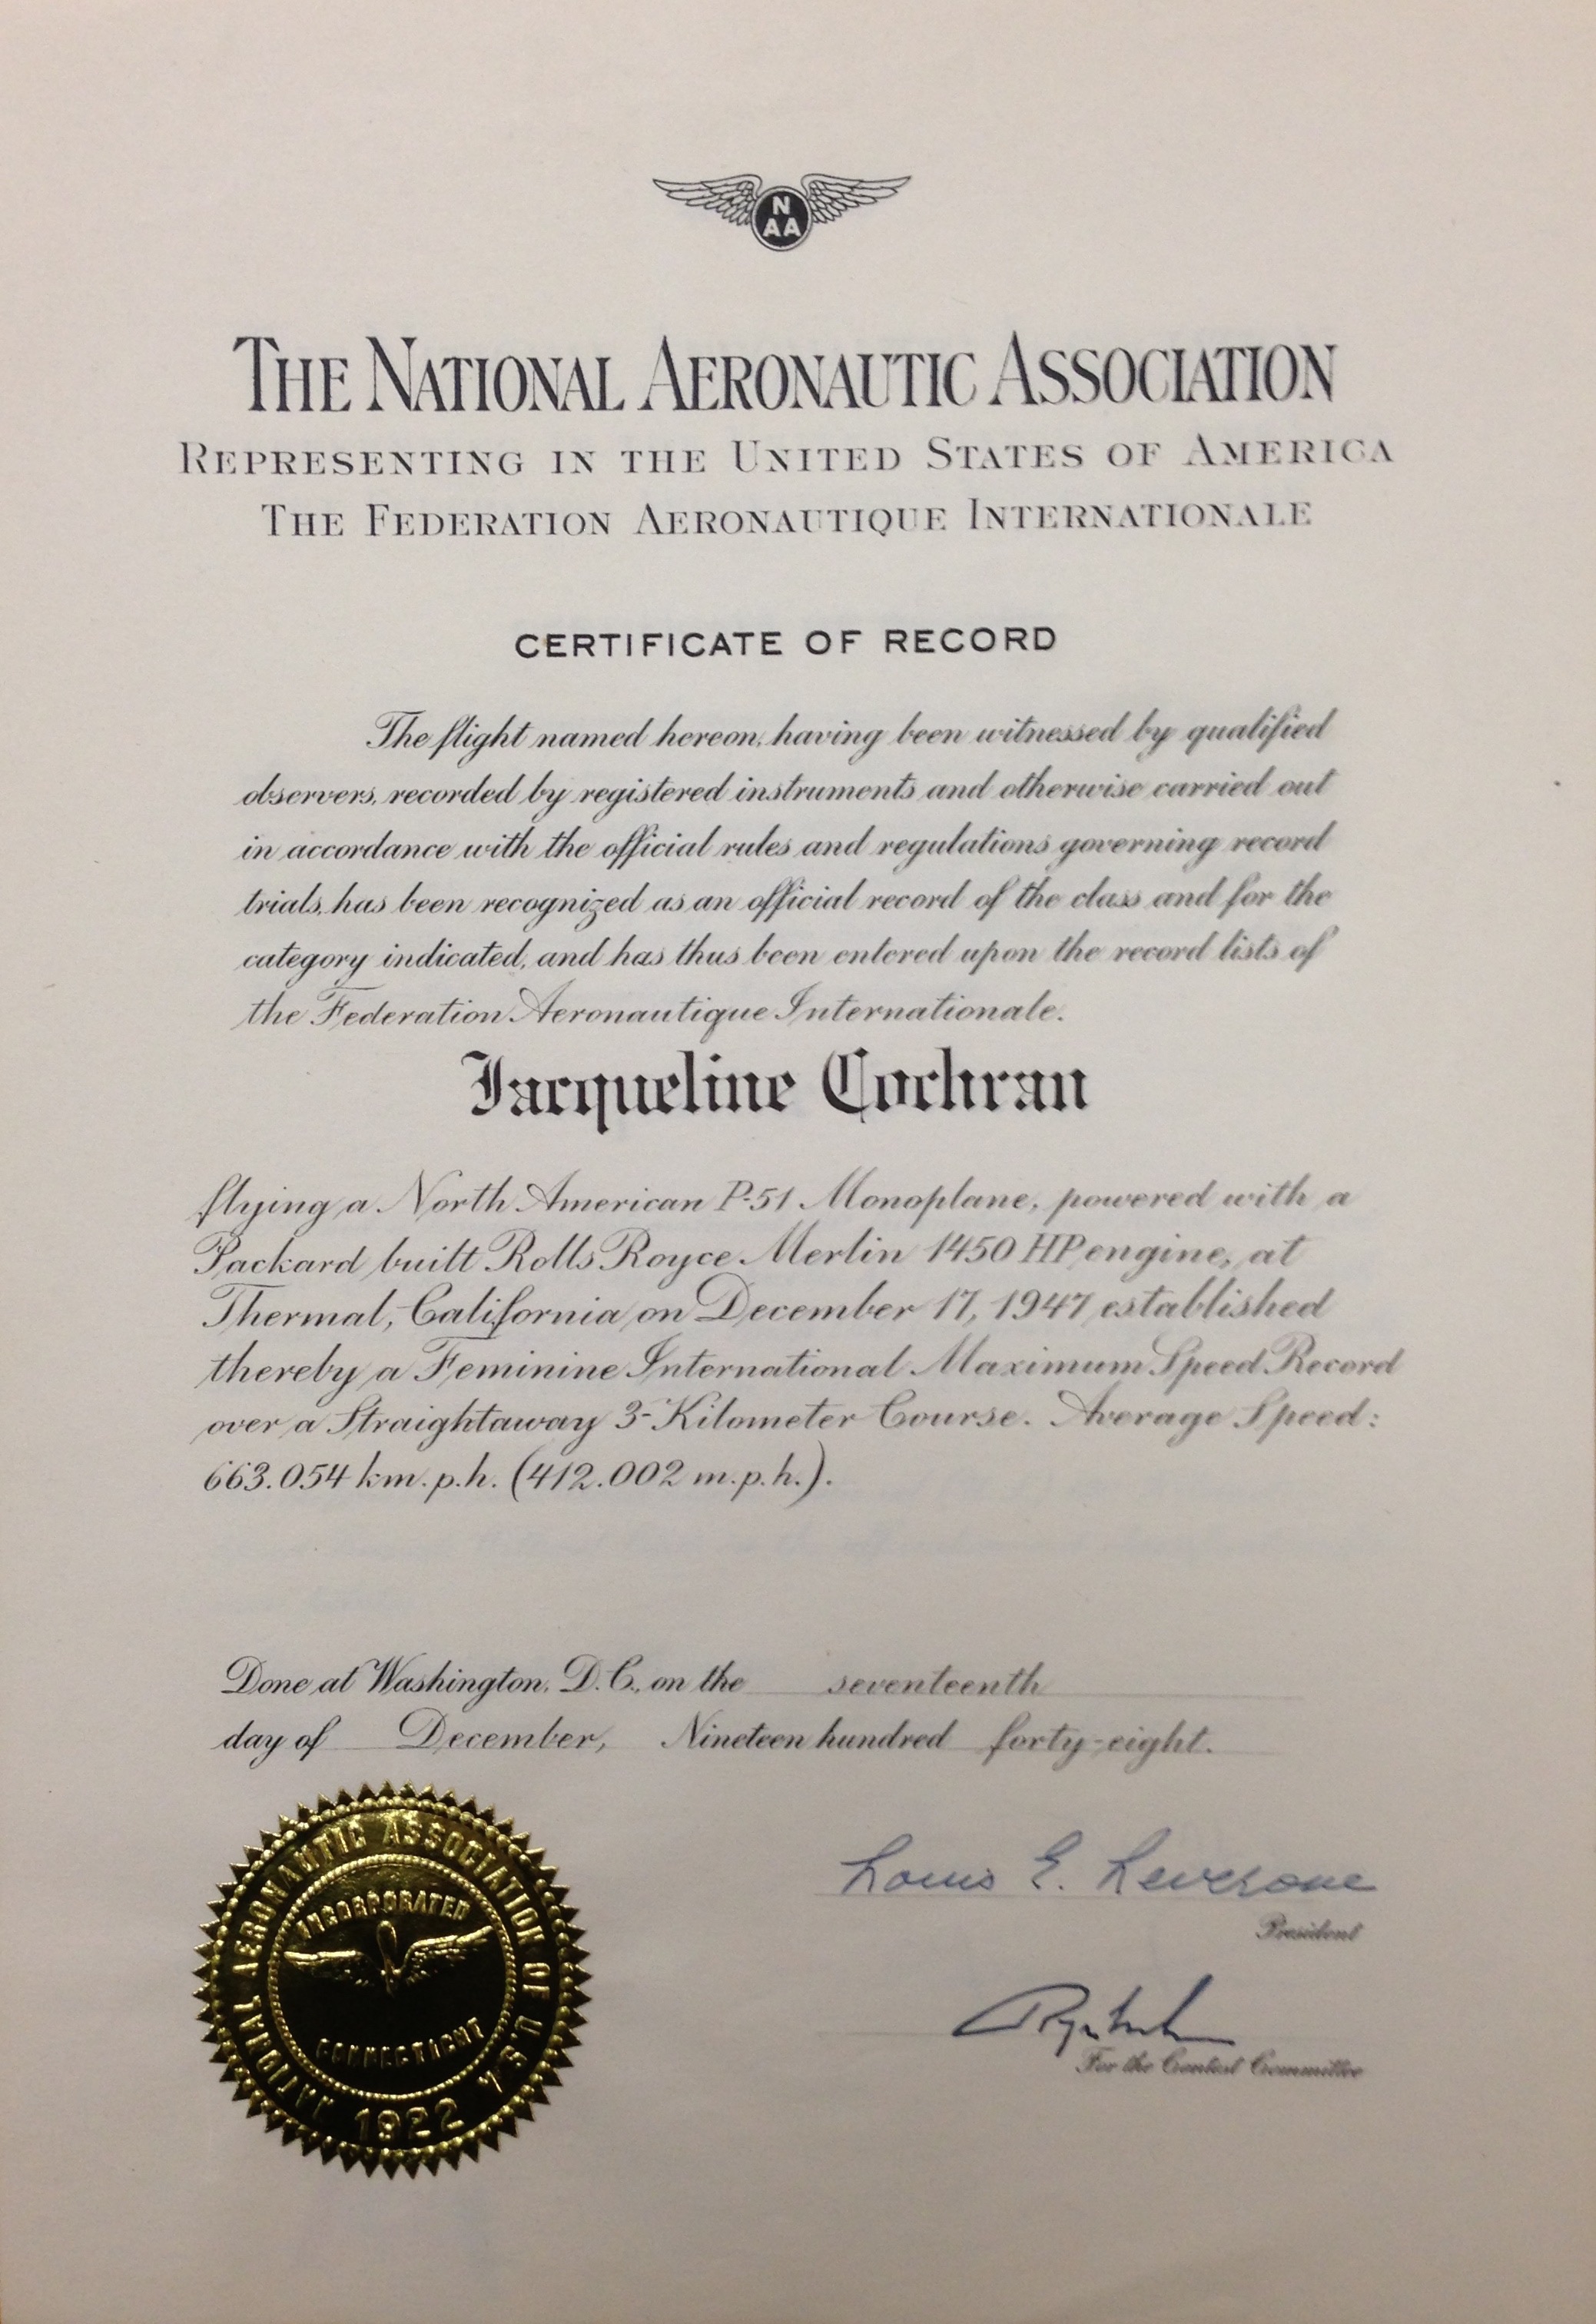 National Aeronautic Association Certificate of Record in the San Diego Air and Space Museum Archives. (Bryan R. Swopes)